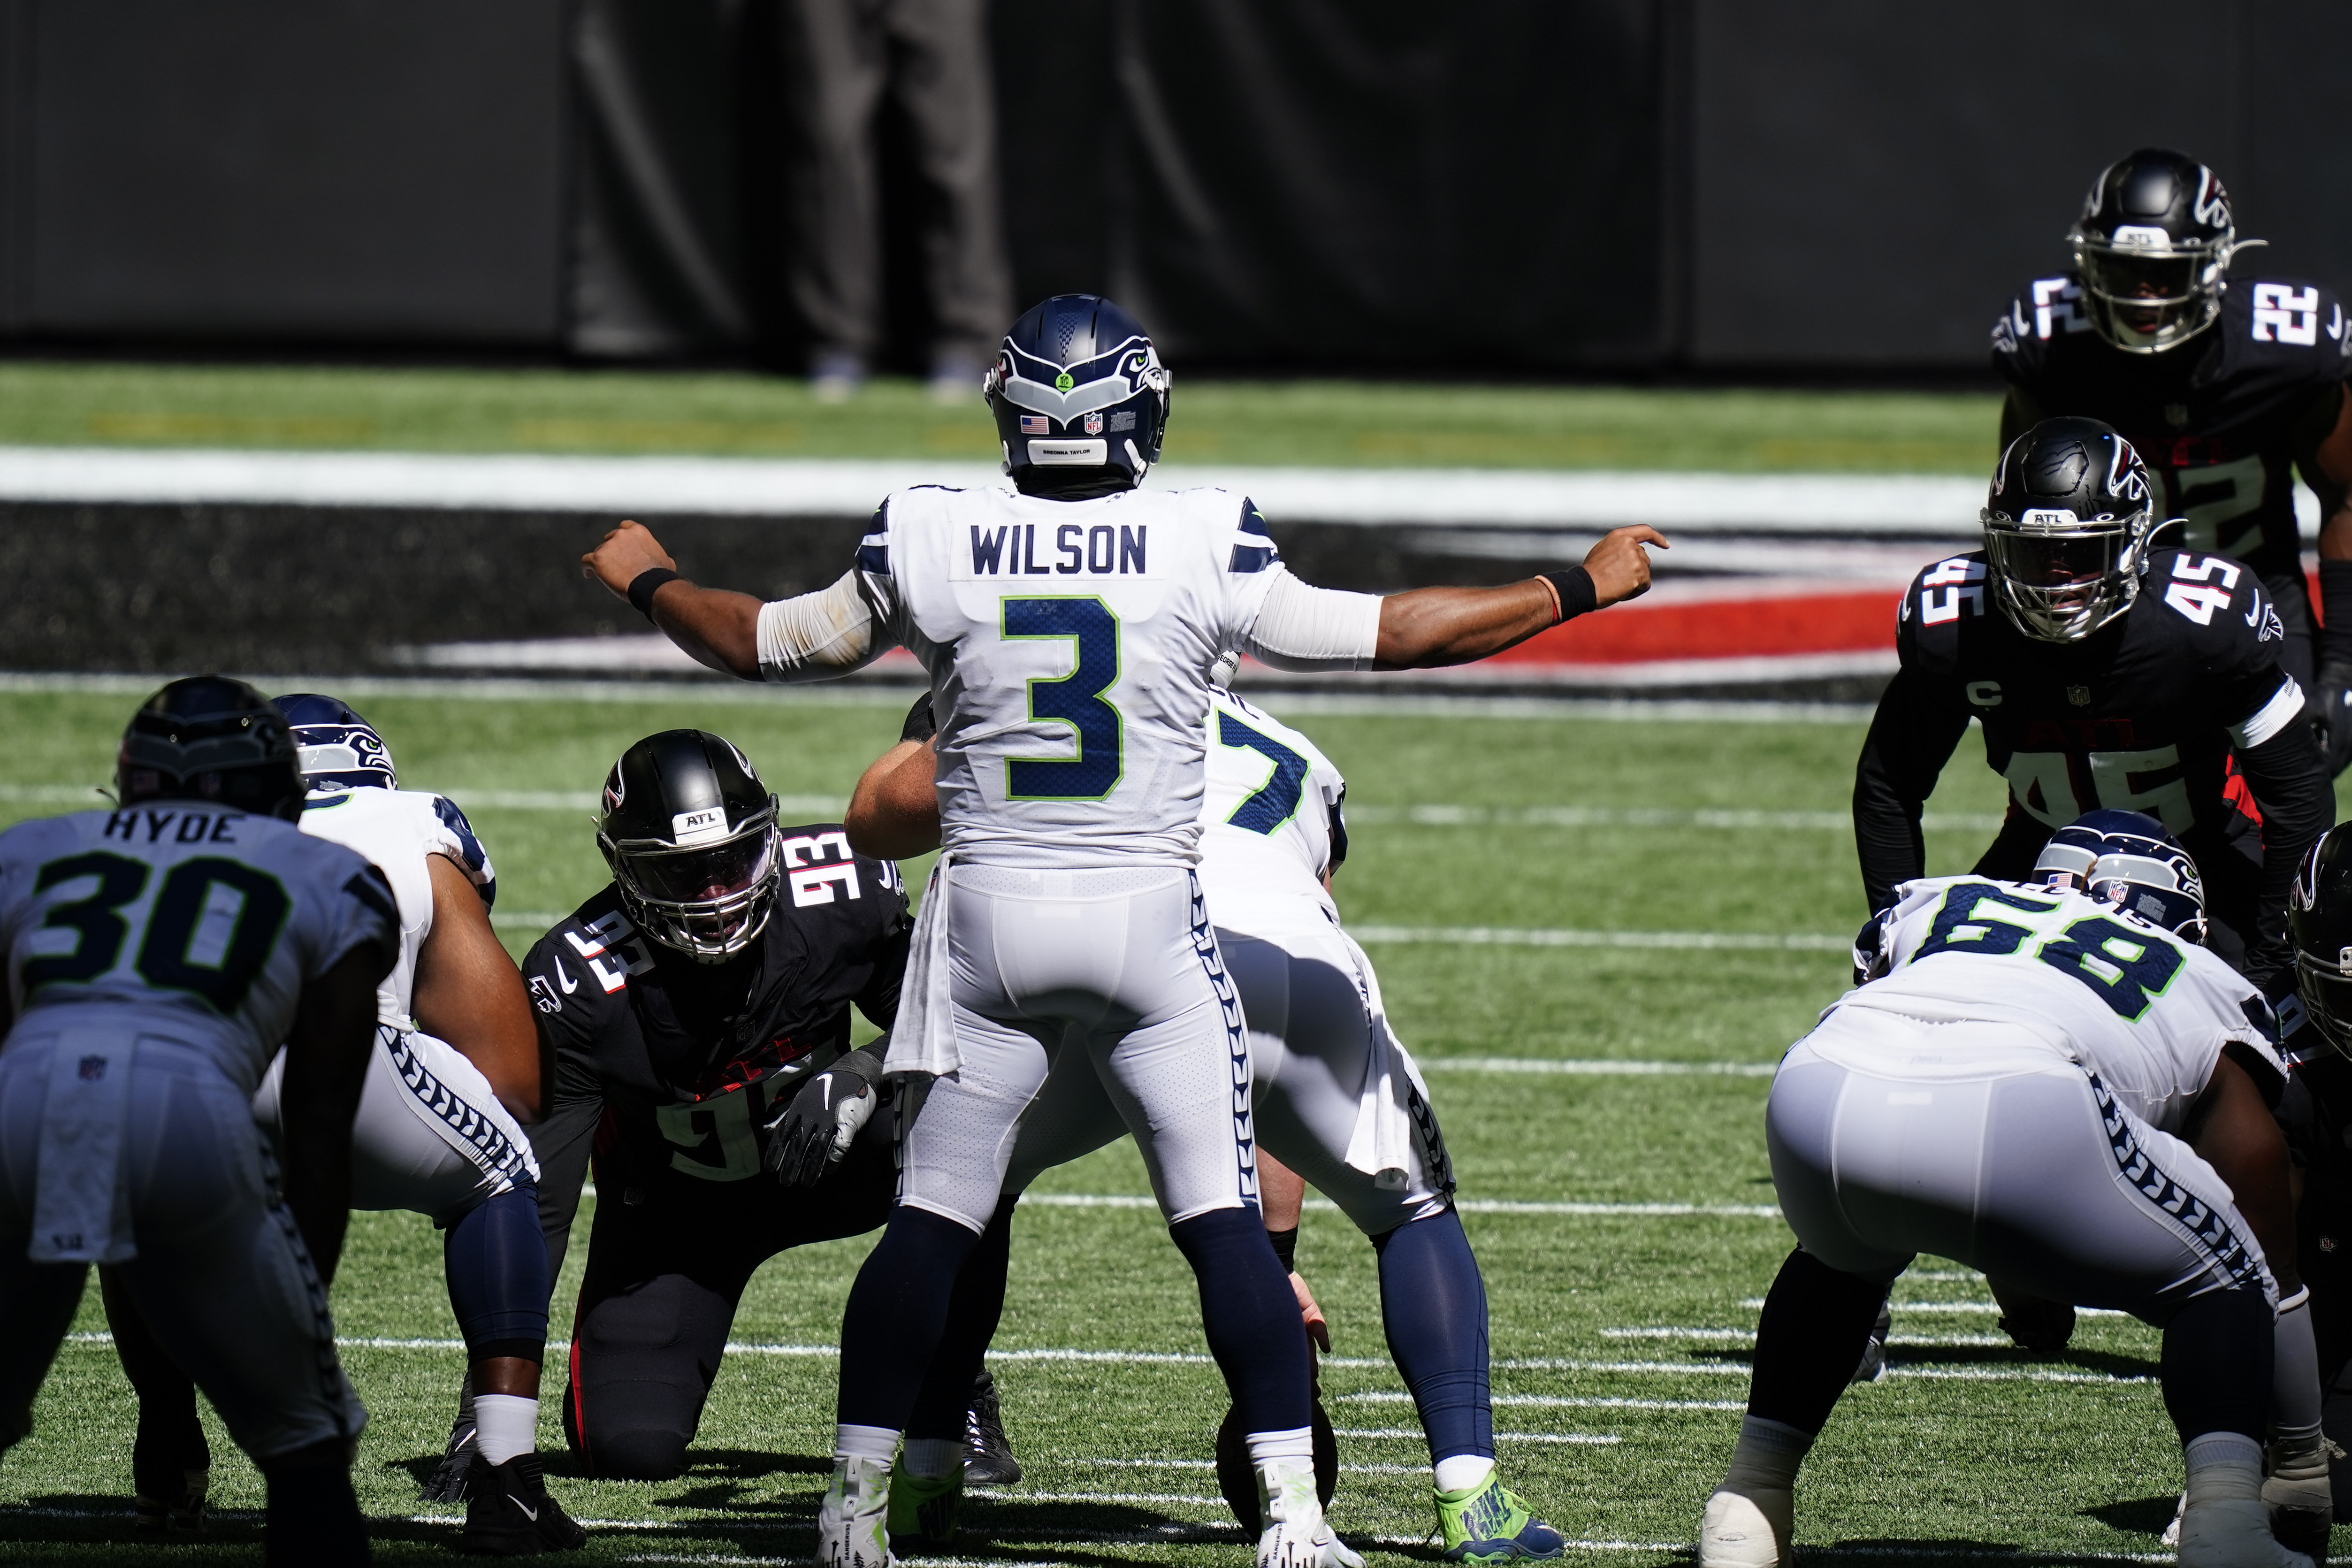 Falcons lose to Seahawks, Russell Wilson throws 4 touchdown passes